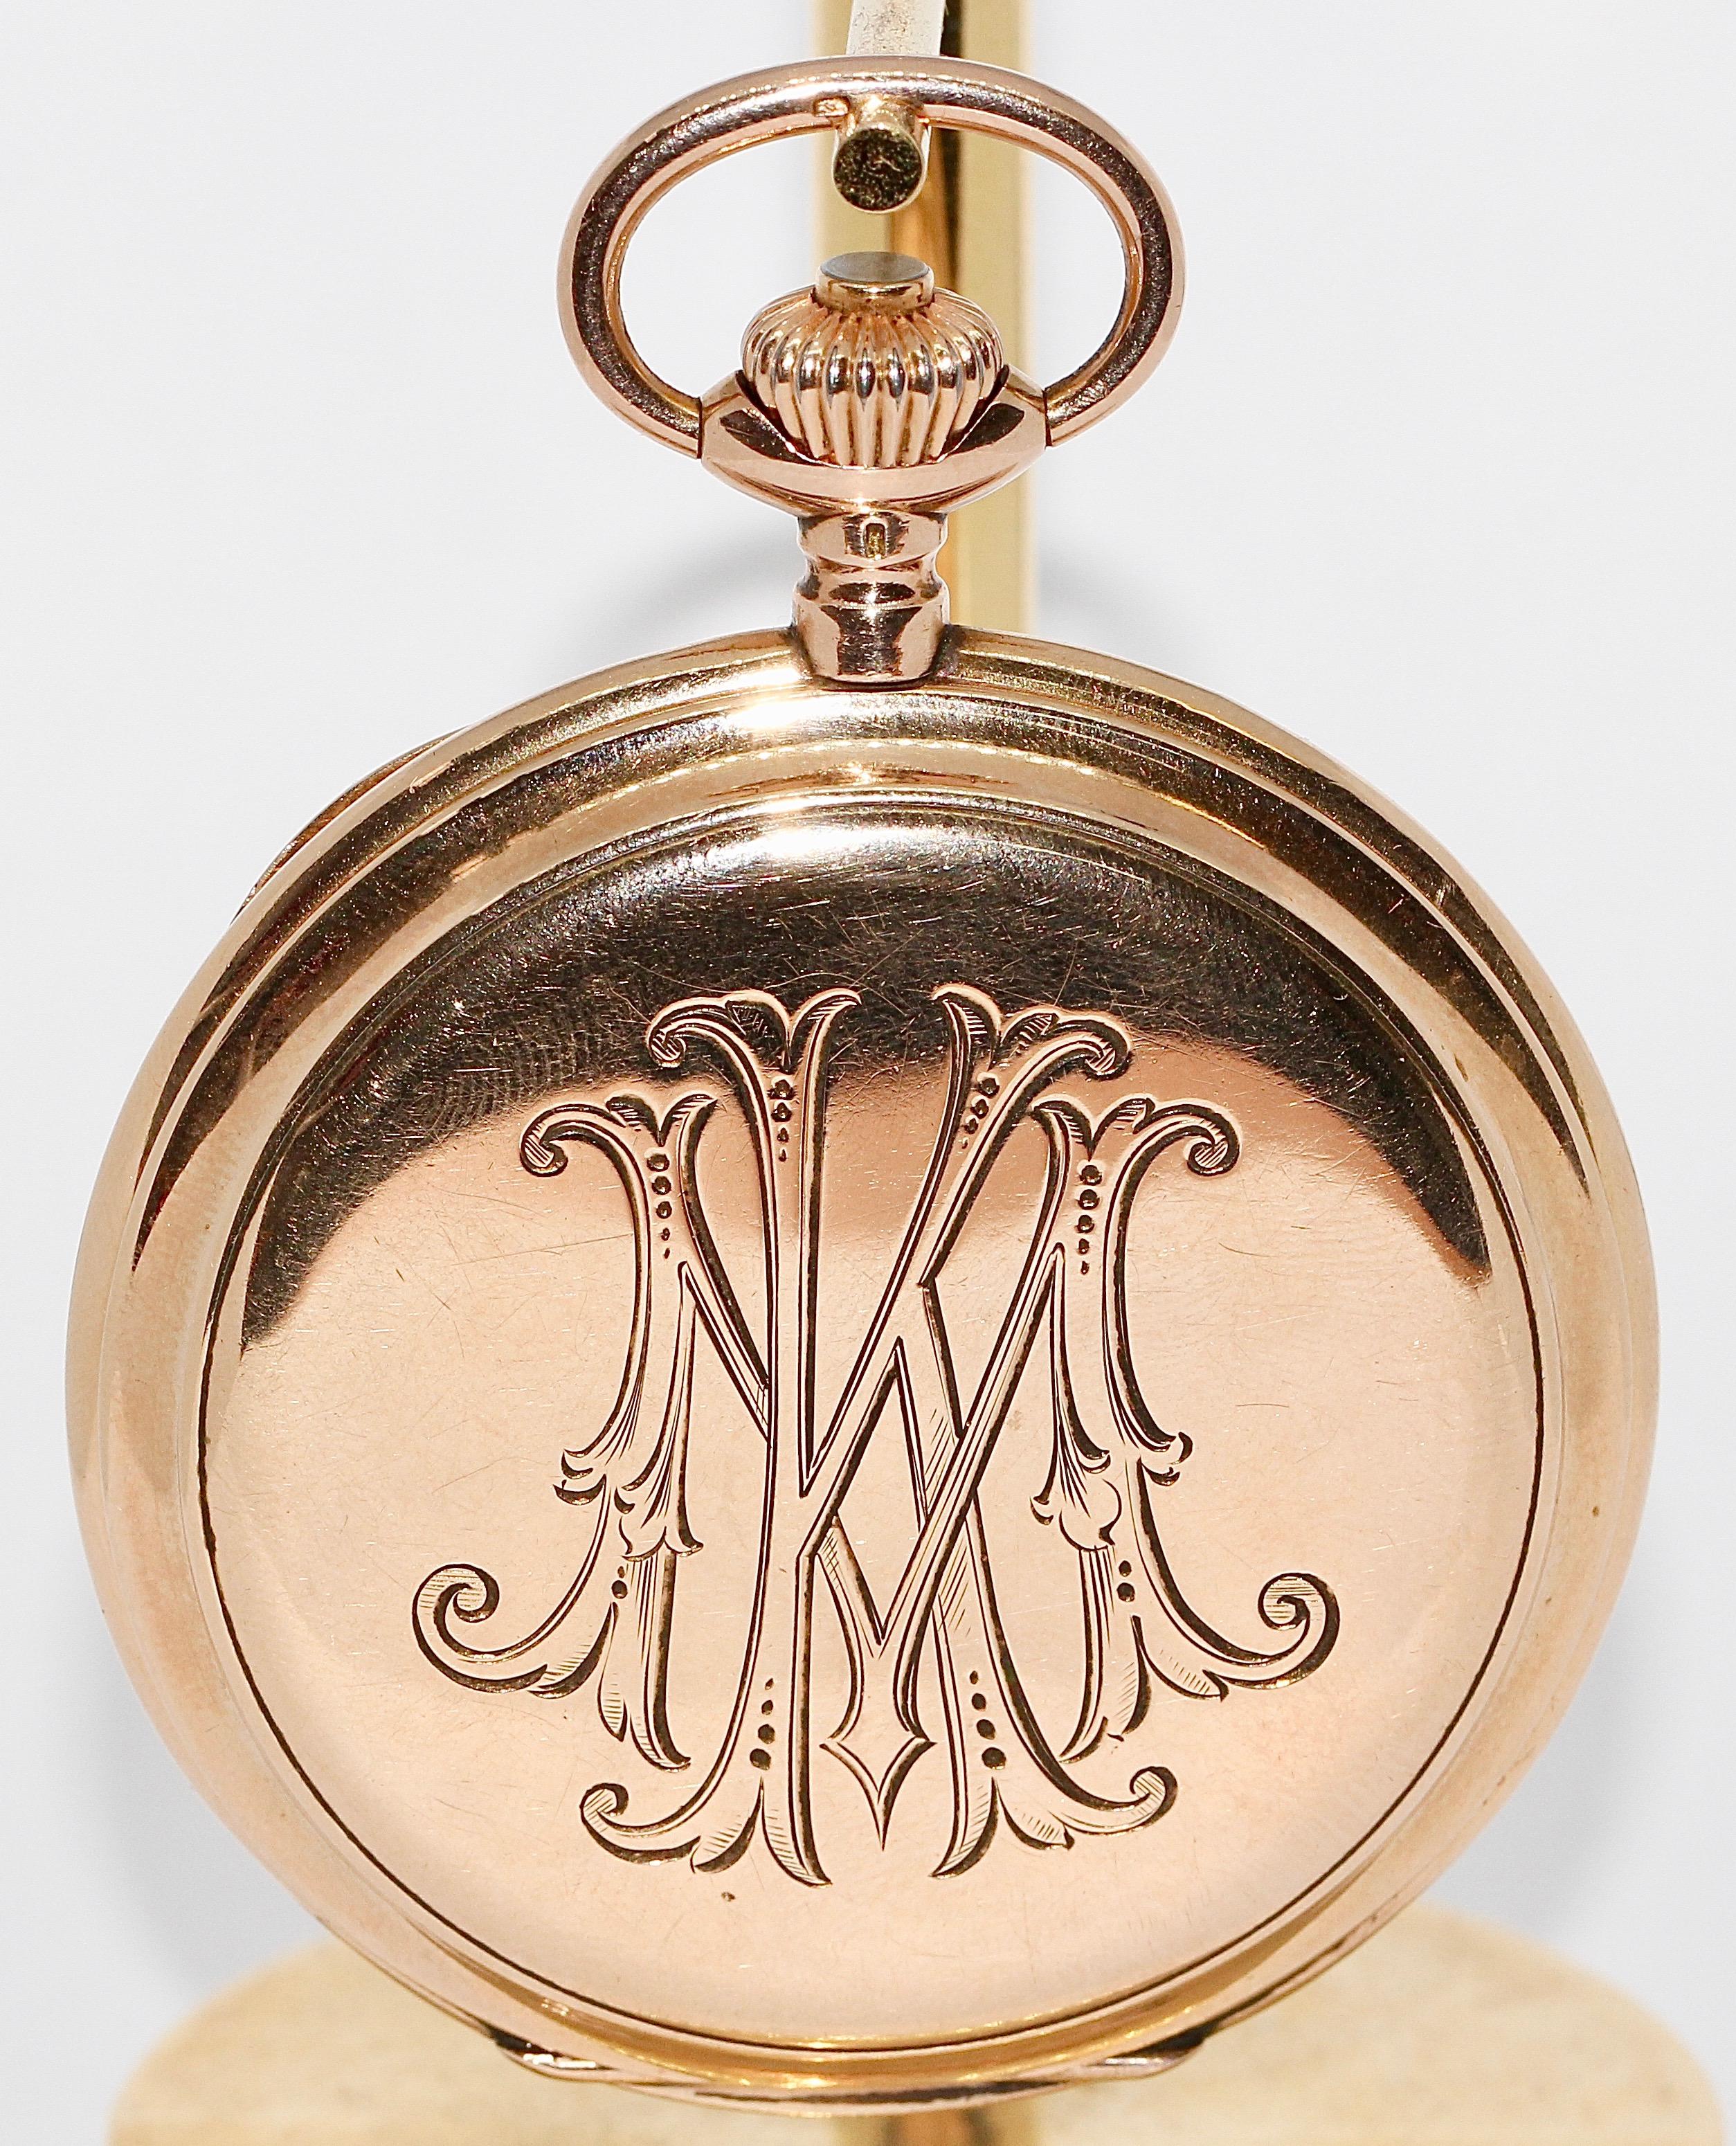 Antique, historical IWC Hunter Pocket Watch. 14 Karat yellow Gold.

All three lids in 14 Karat solid gold.

Dial has a hairline crack between 7 and 8 o'clock.

Manual wind works.
Time setting works.
Watch works fine.

Good condition due to age.